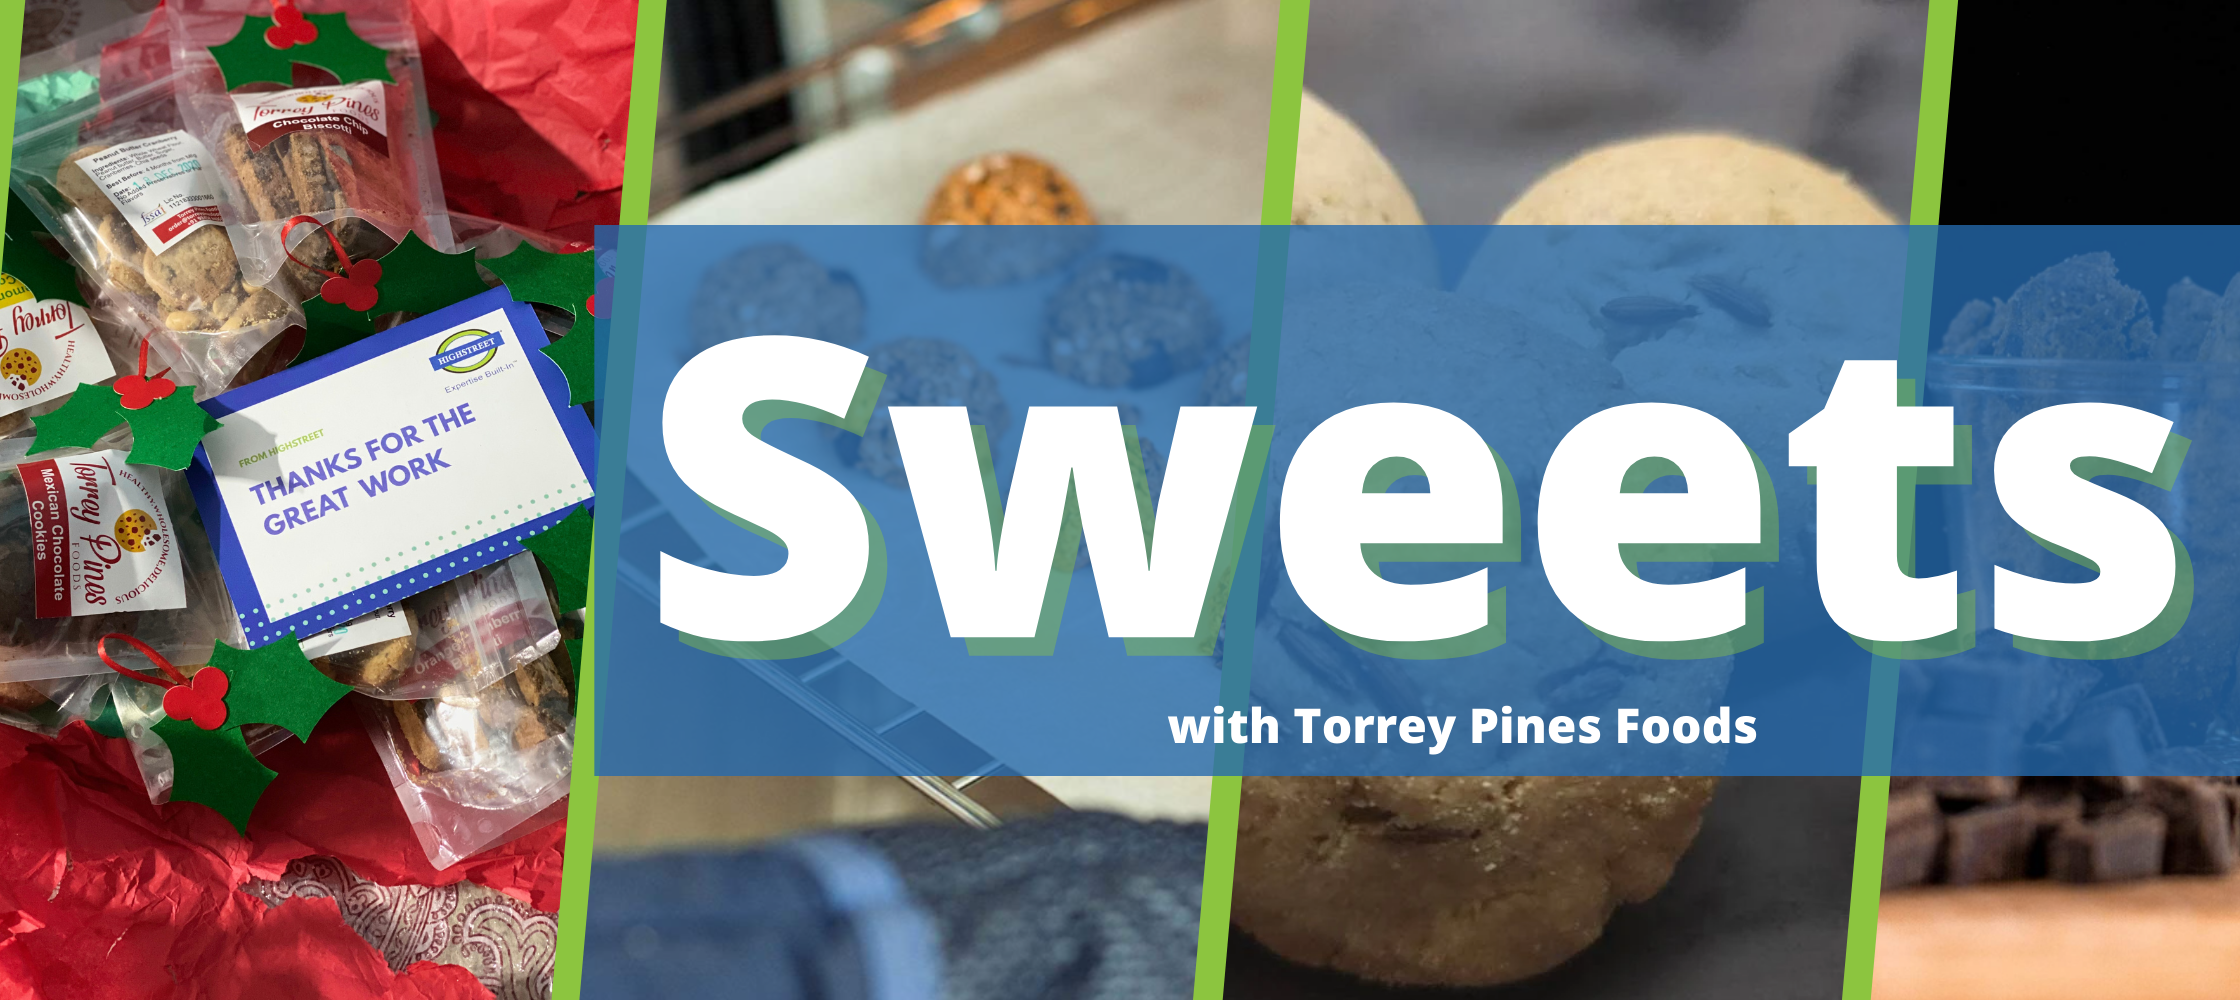 Sweets with Torrey Pines foods